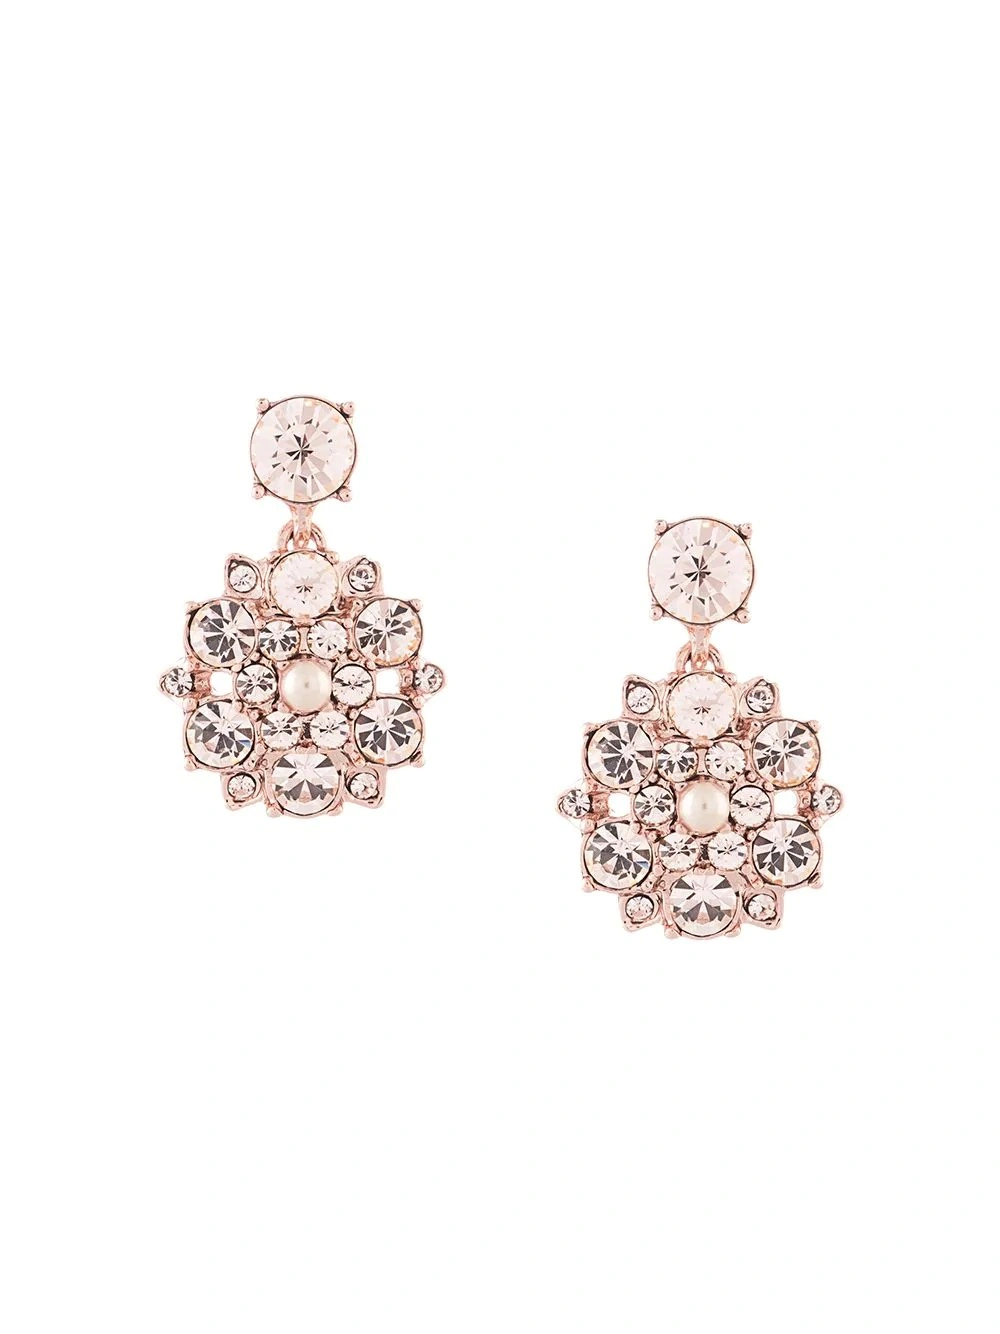 Fashionable and Elegant Pink Crystal Earrings Jewelry